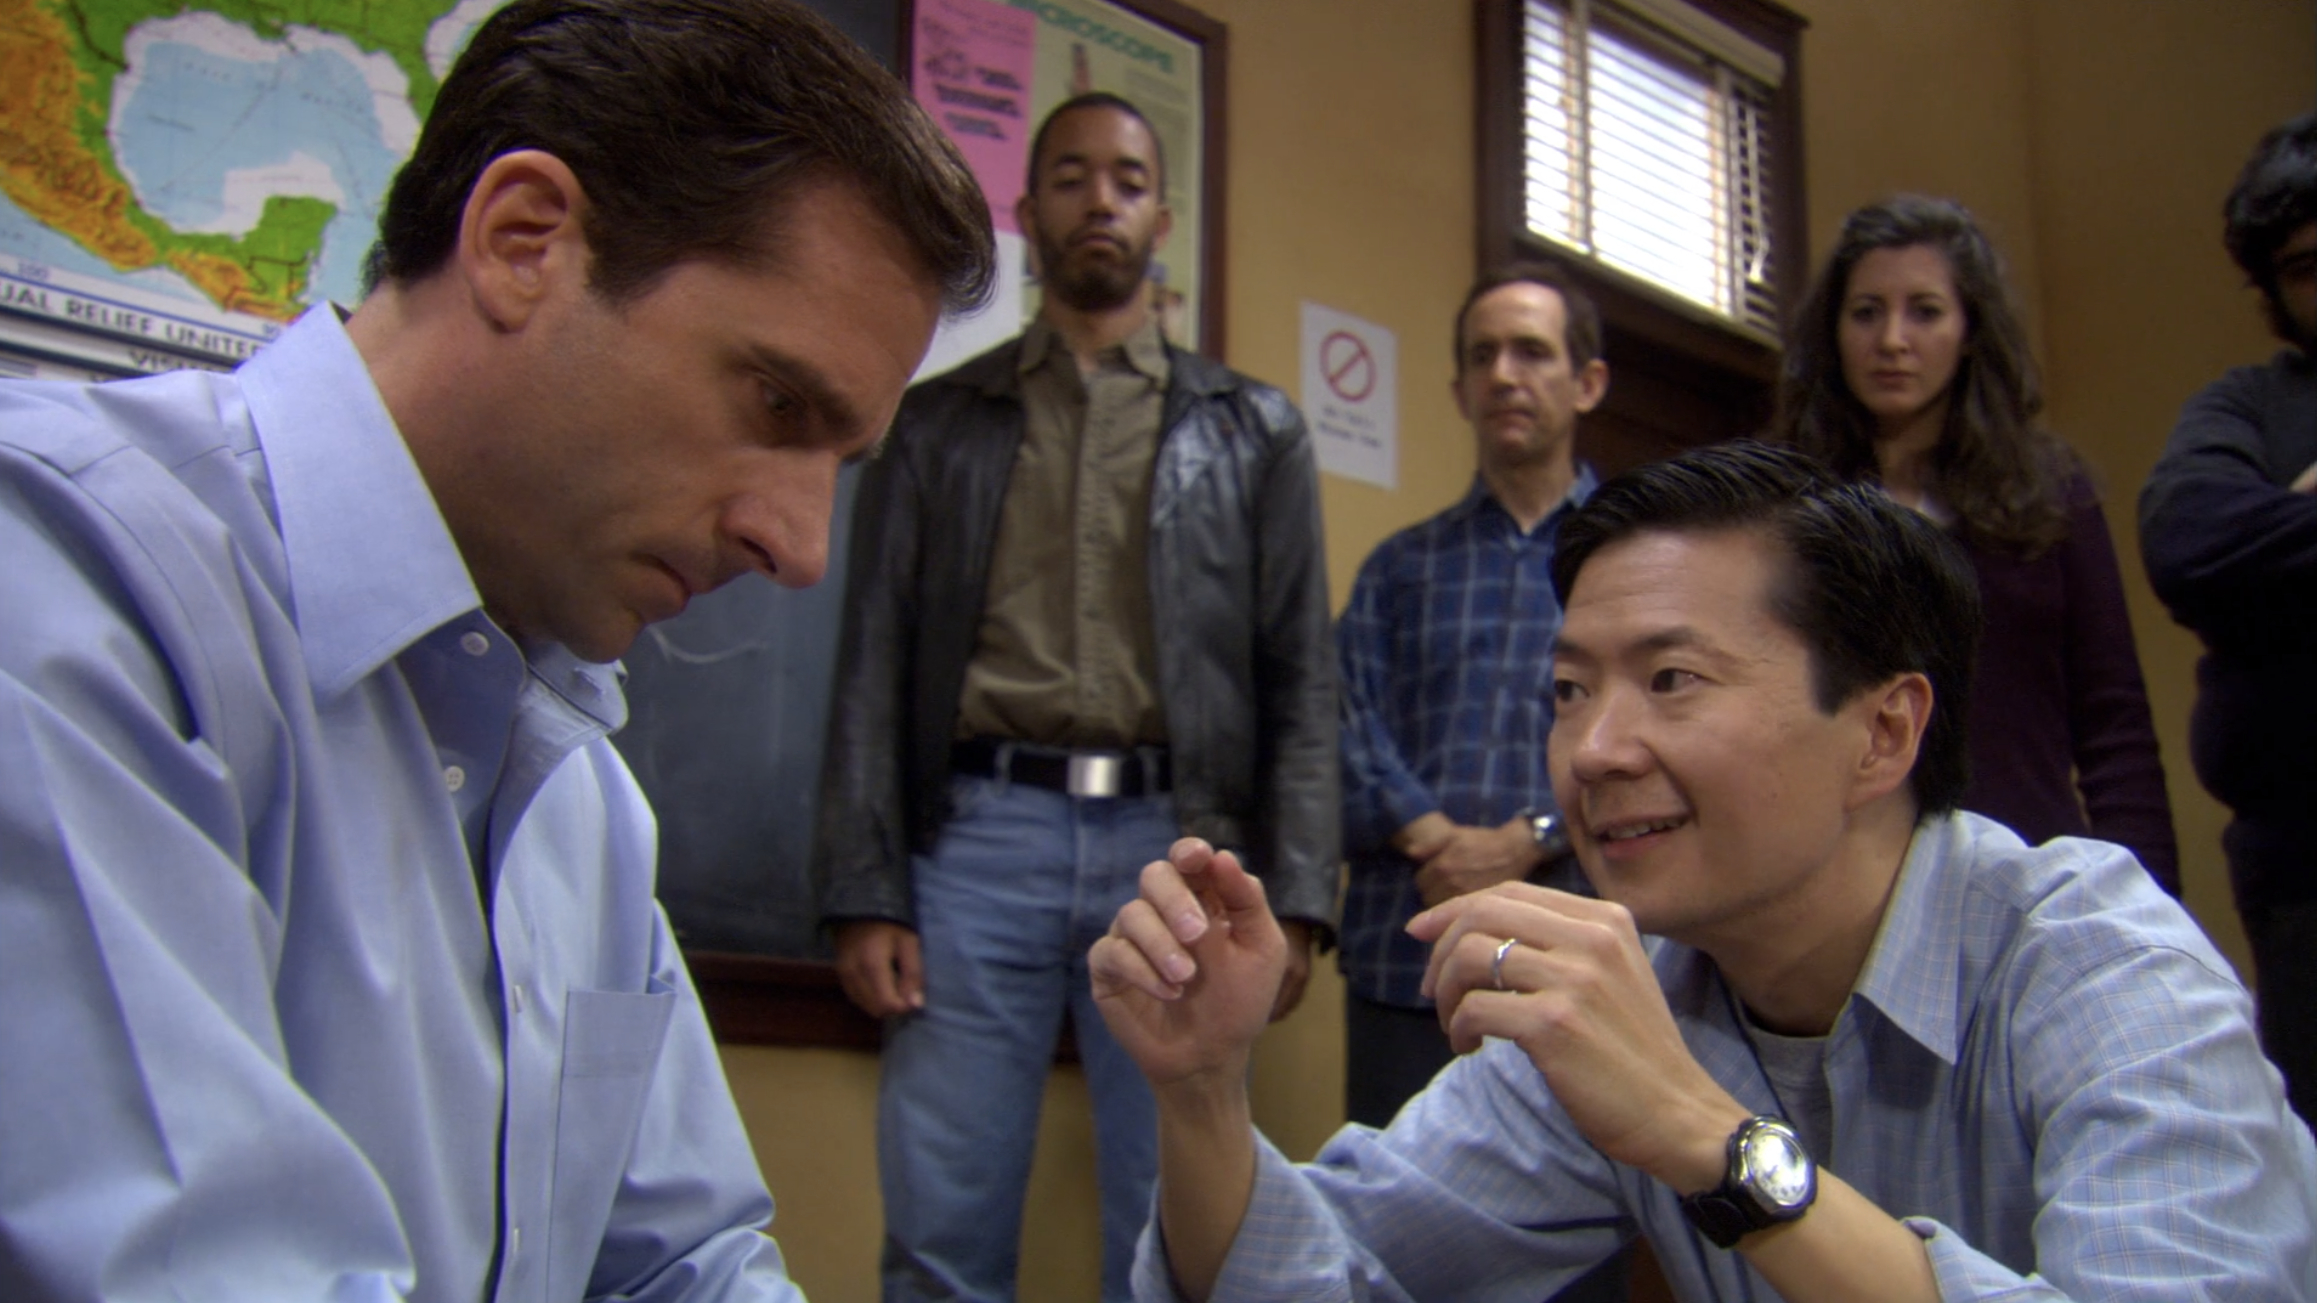 ken jeong and steve carell at improv class in the offce